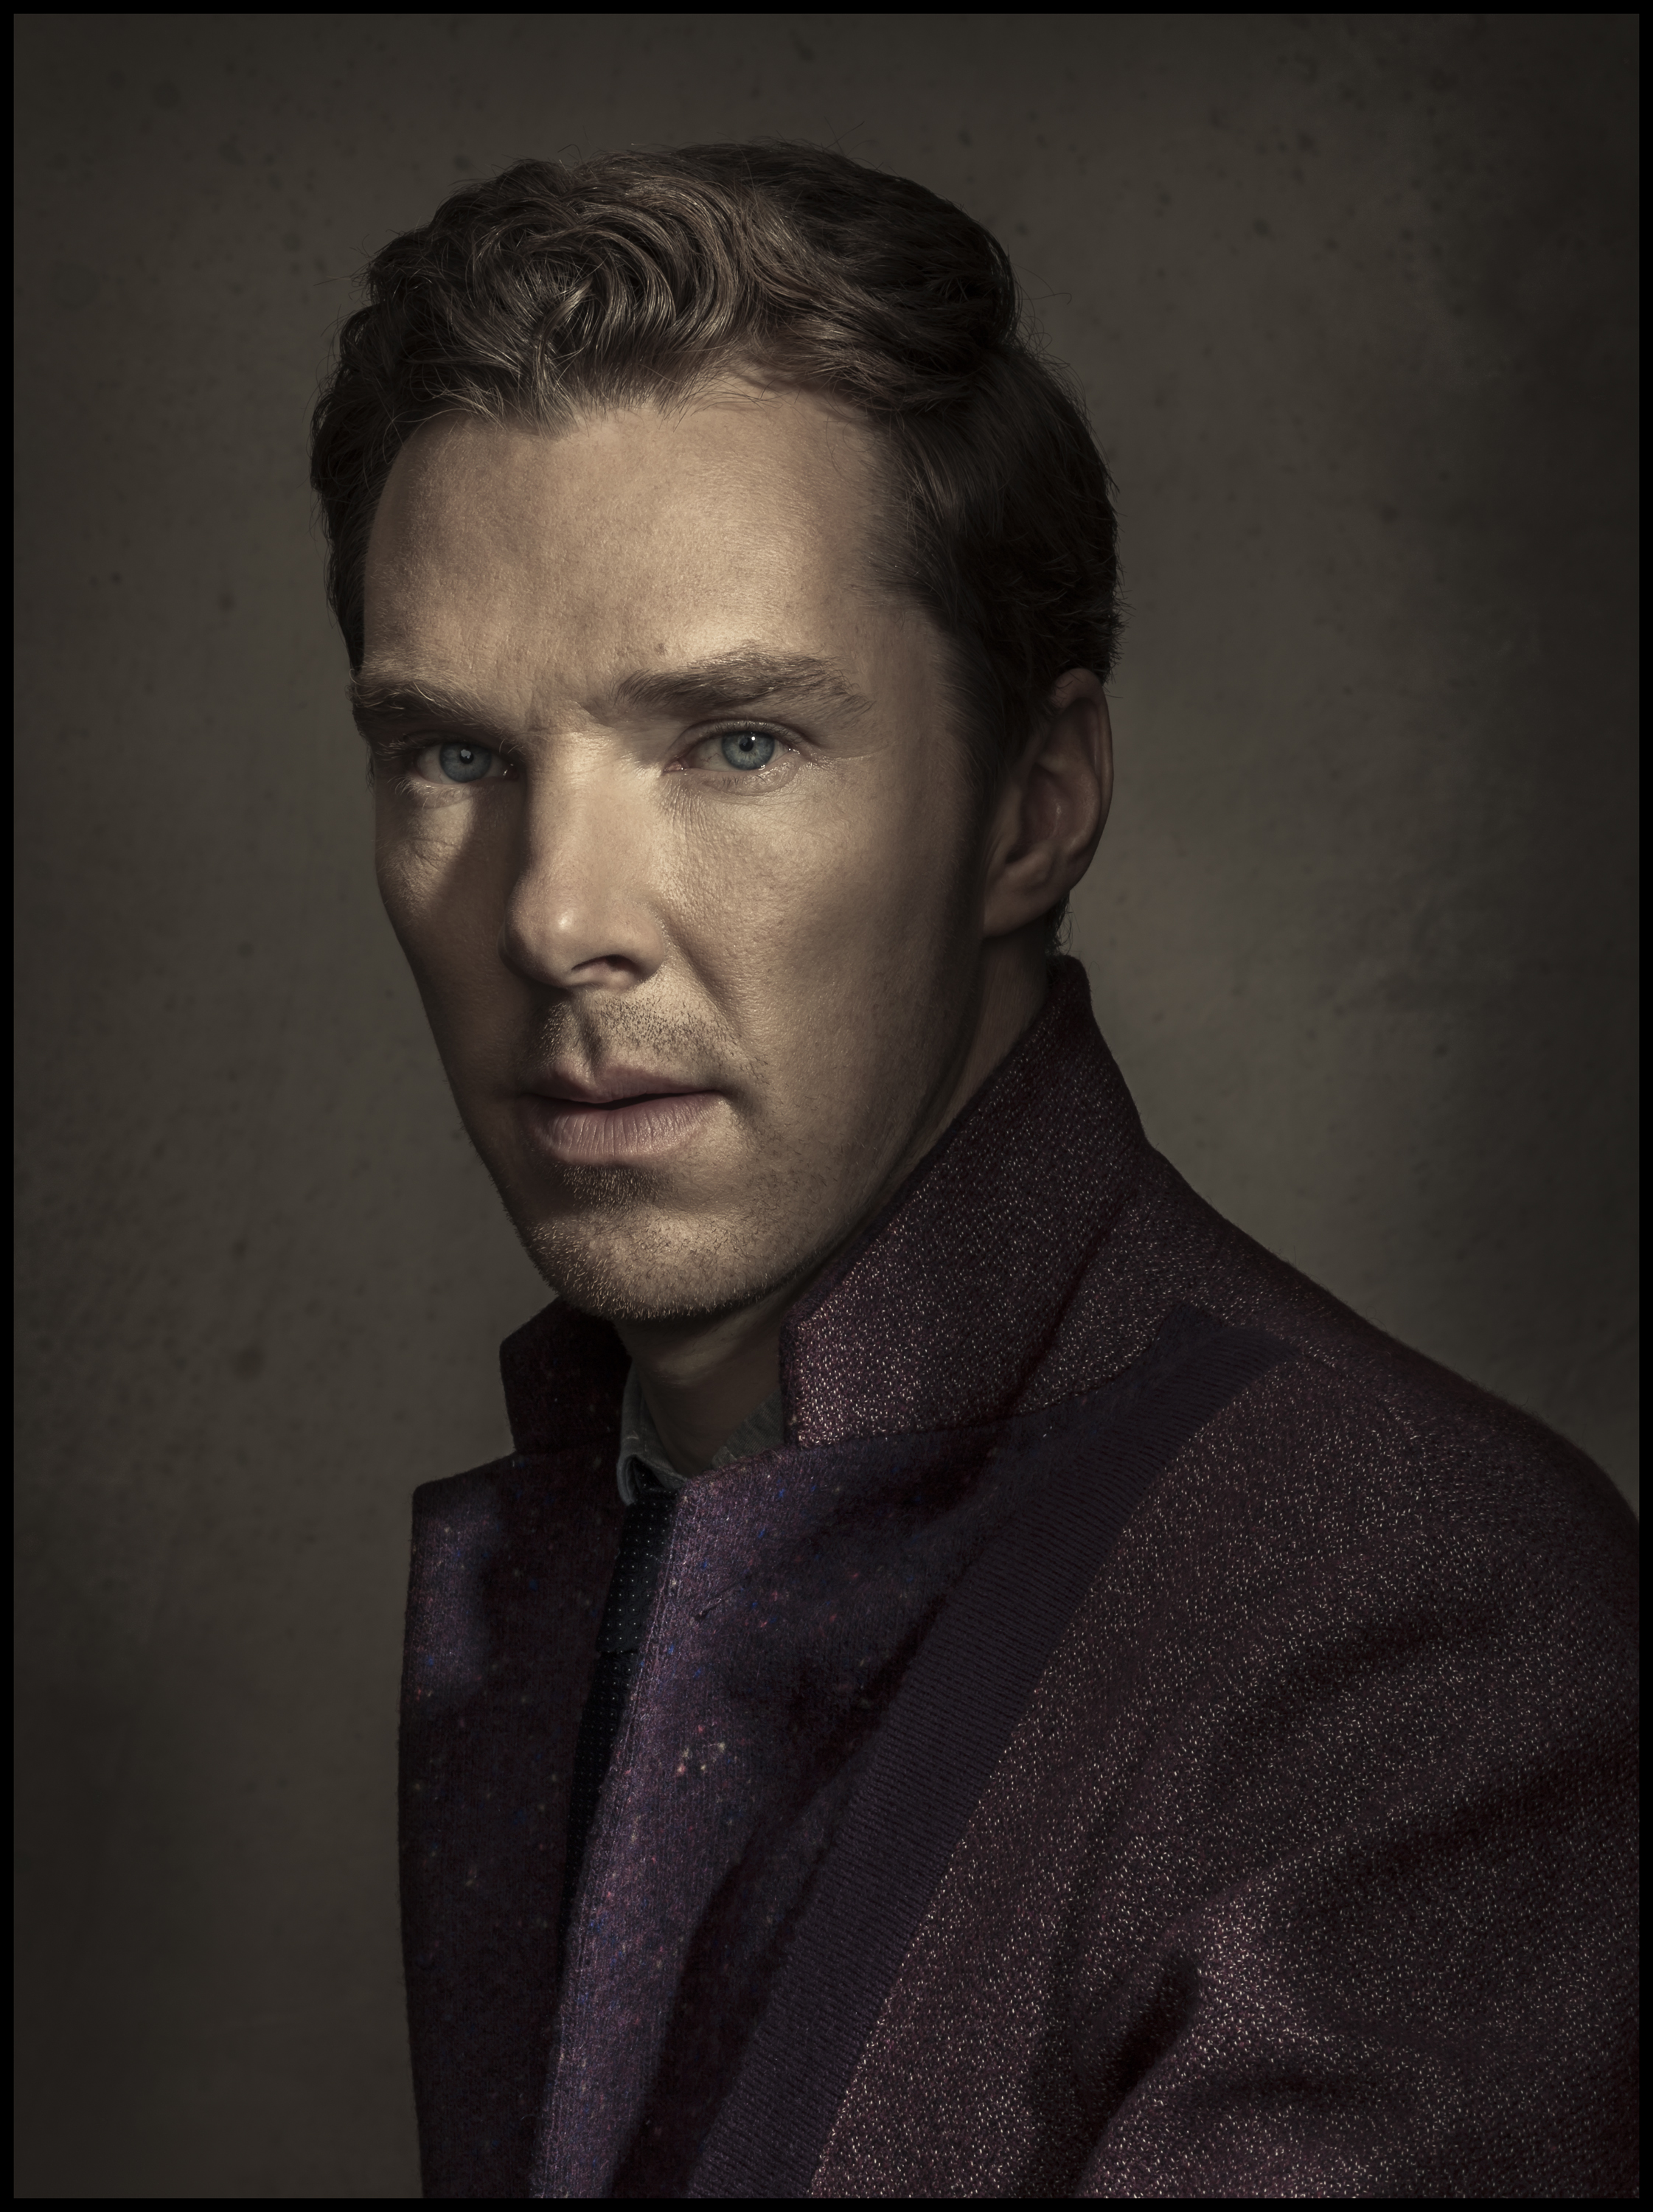 Benedict Cumberbatch, who portrays Turing in The Imitation Game, out Nov. 28 (Dan Winters for TIME)